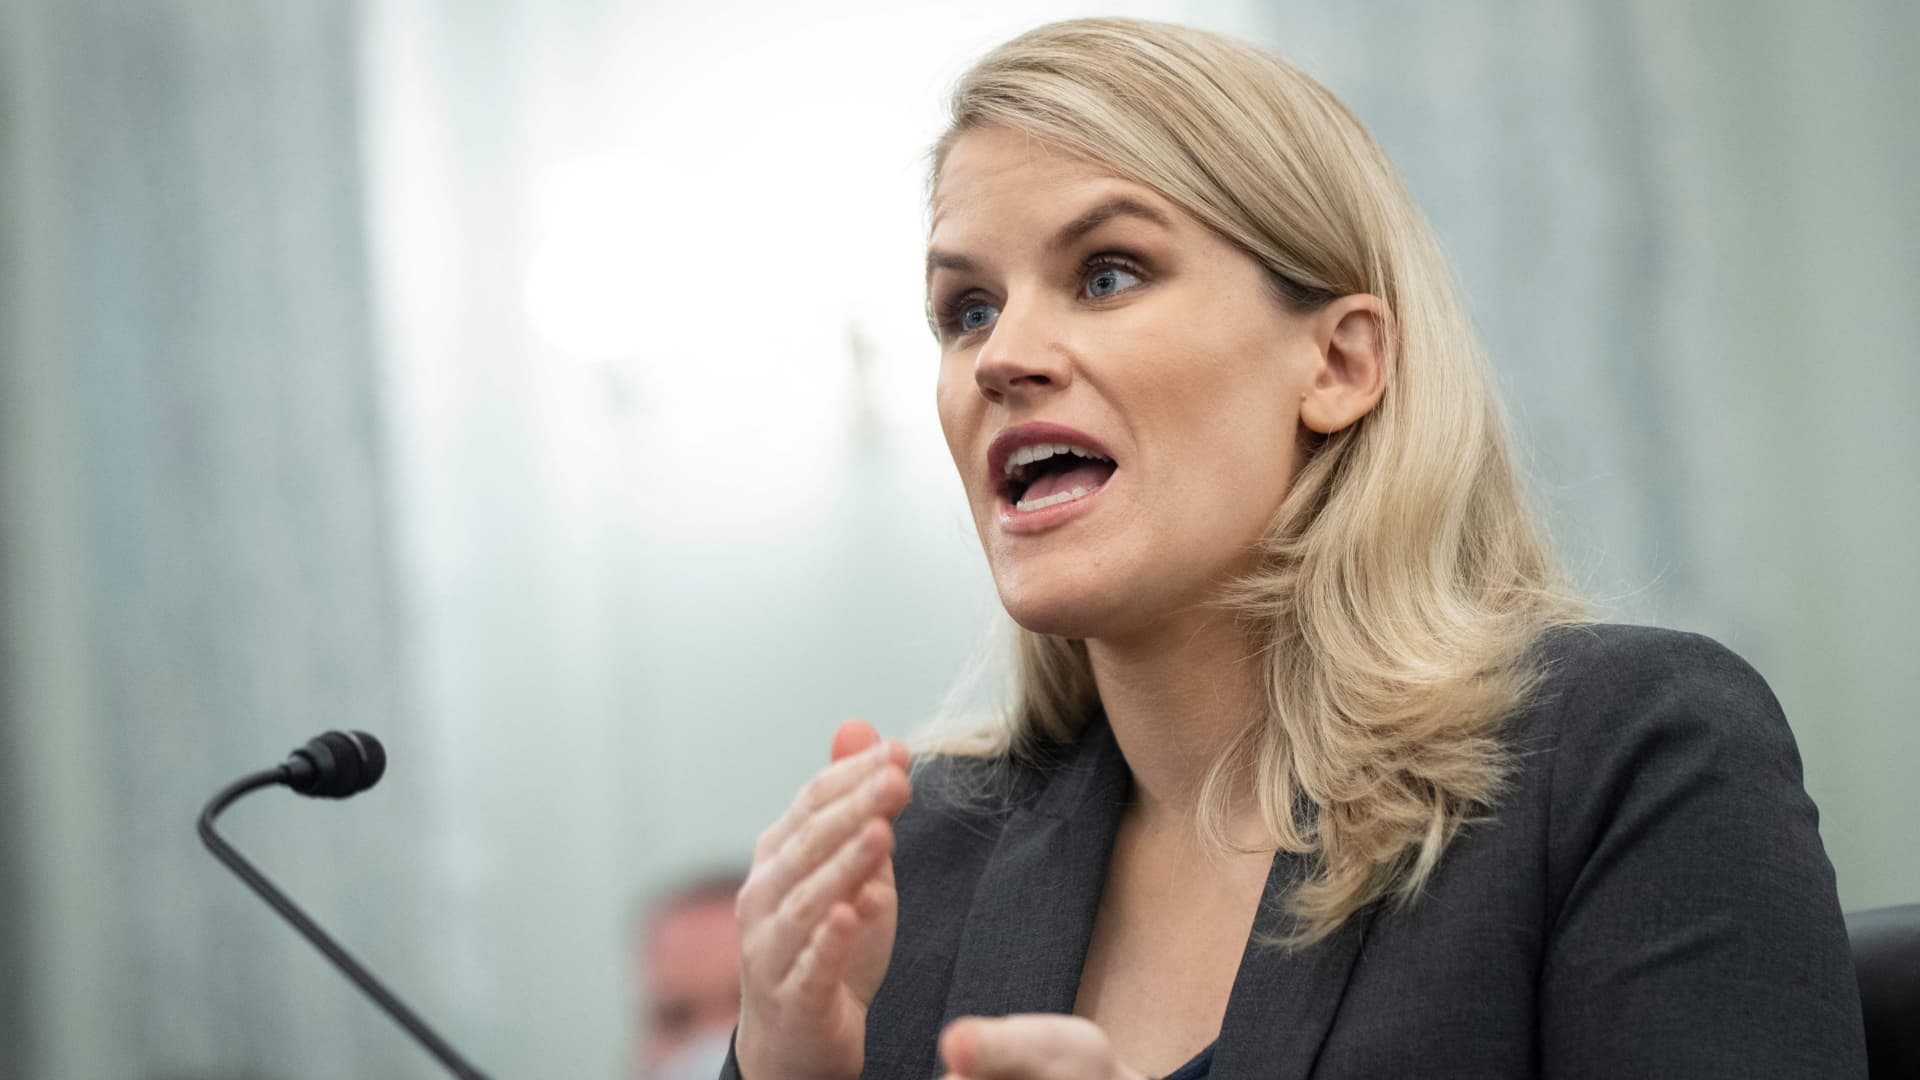 Former Facebook employee and whistleblower Frances Haugen testifies before a Senate Committee on Commerce, Science, and Transportation hearing on Capitol Hill, October 5, 2021, in Washington, DC.